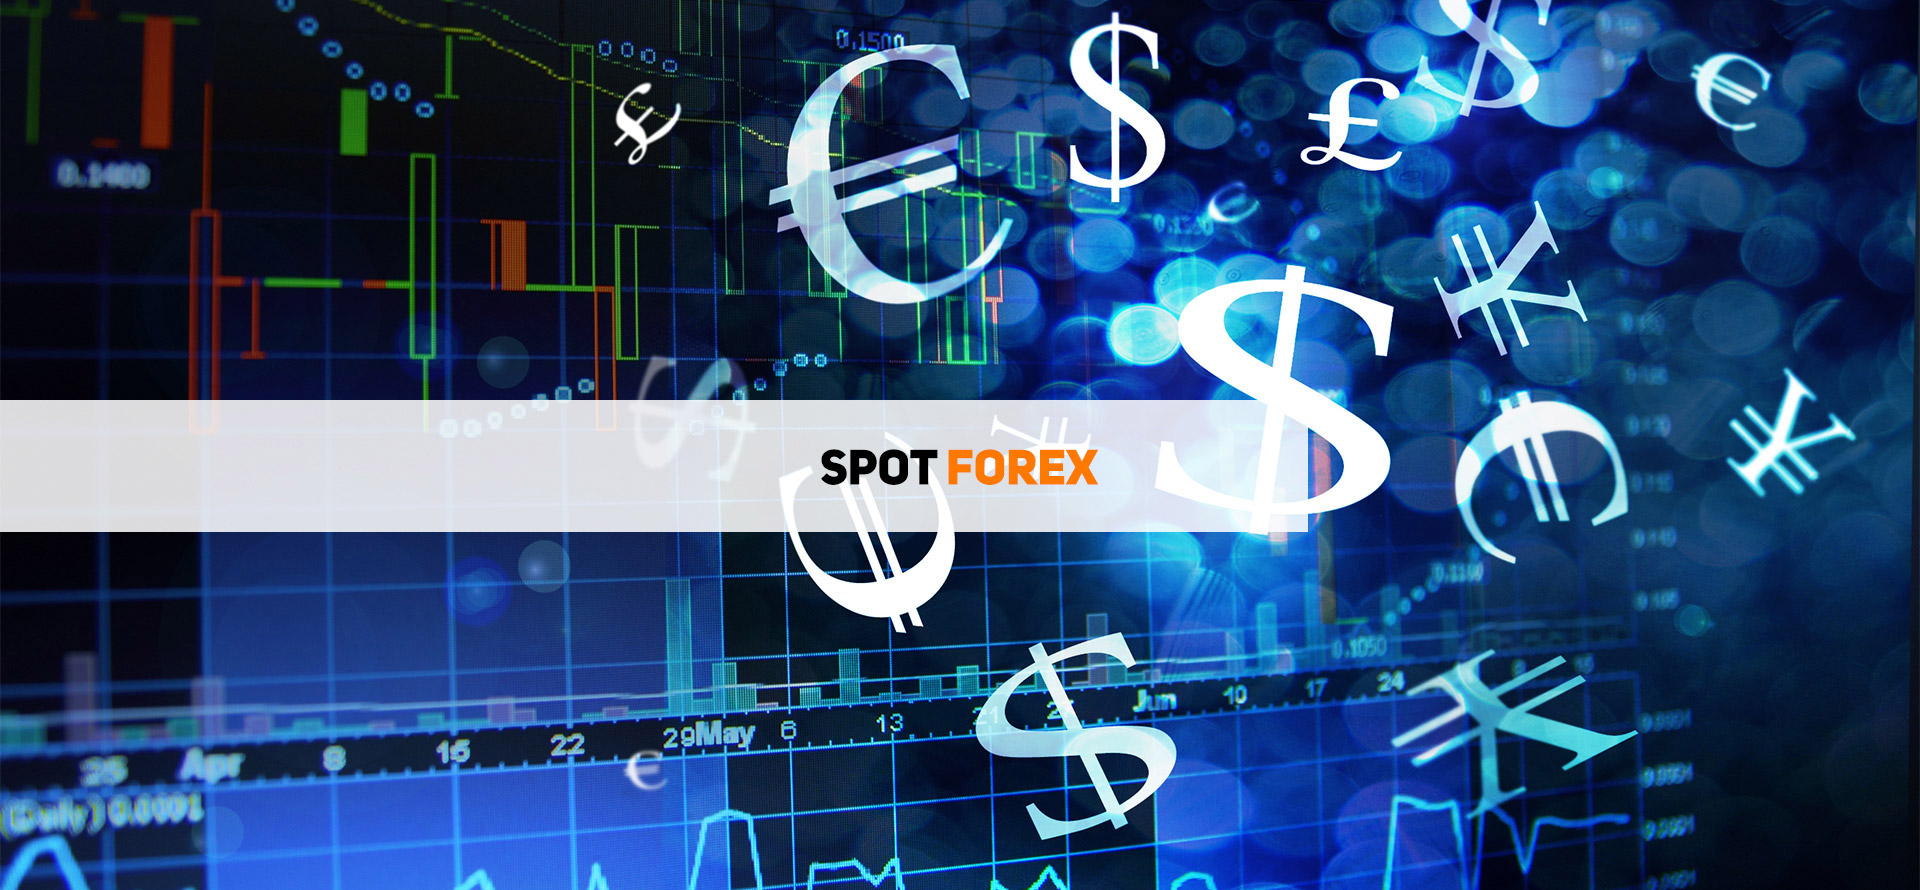 How to trade spot forex